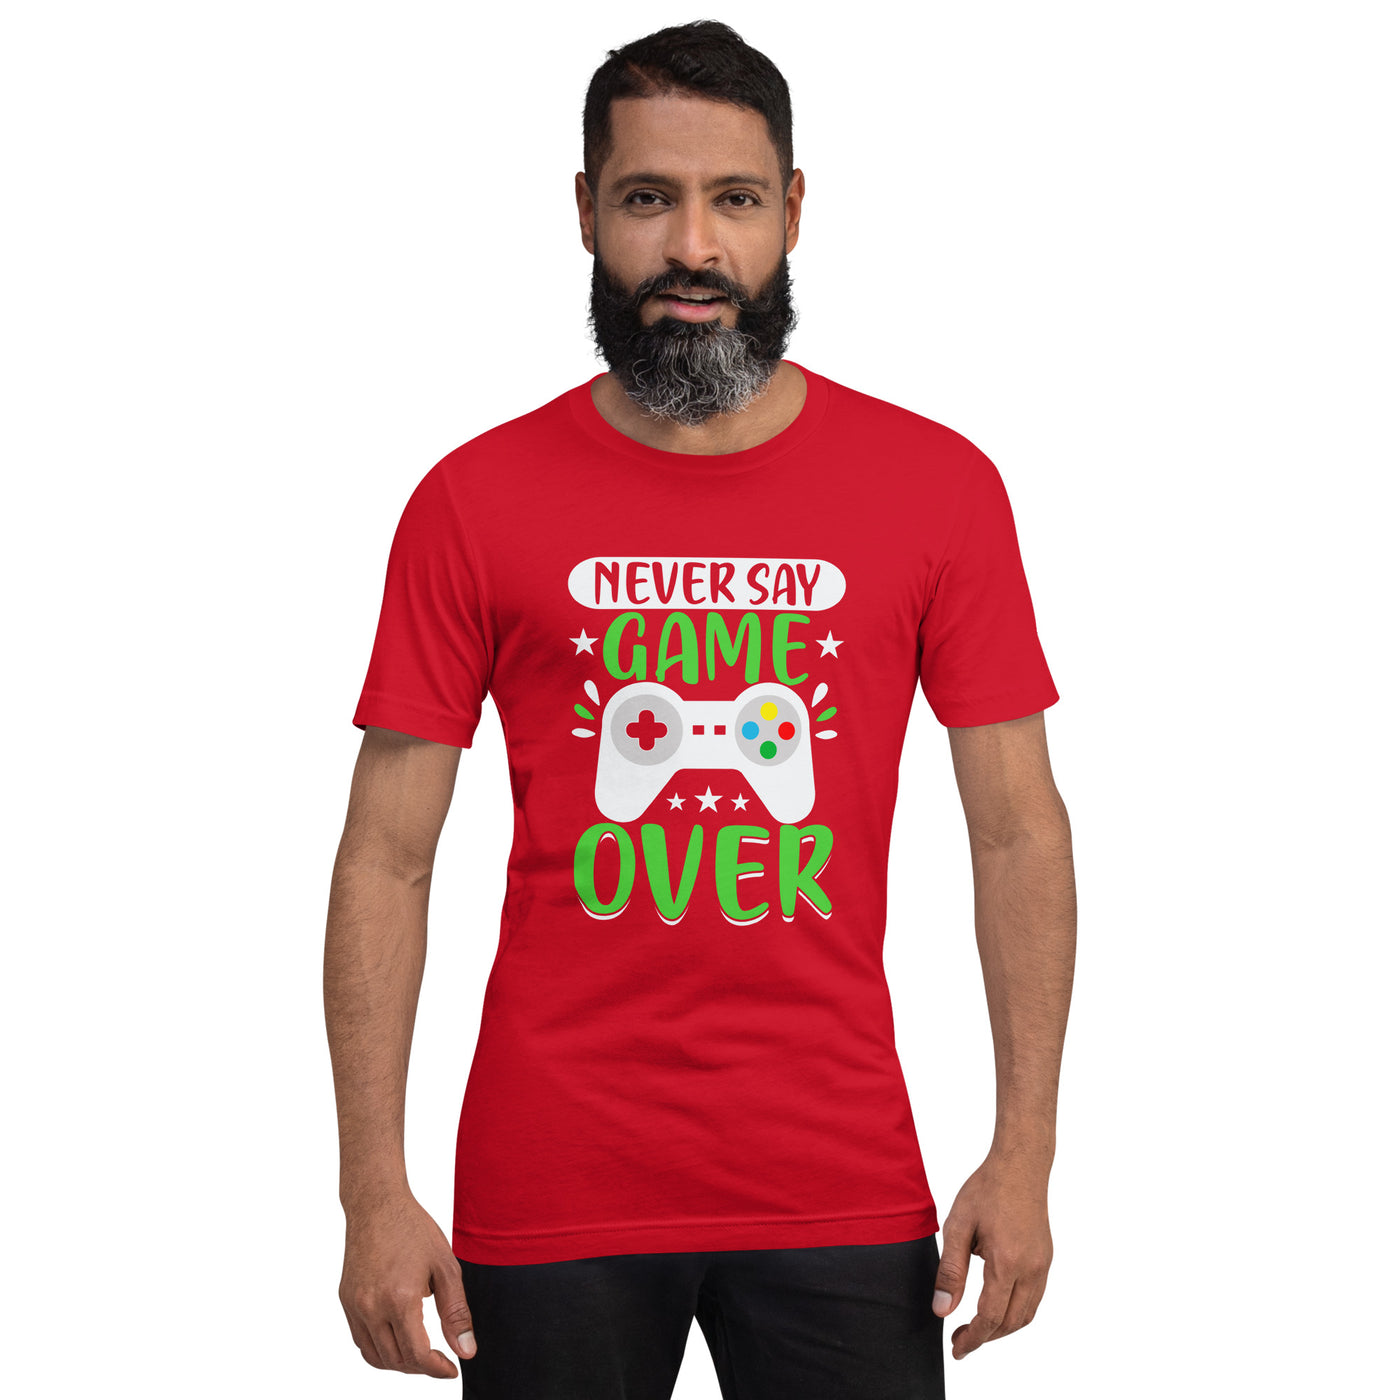 Never say Gameover Unisex t-shirt